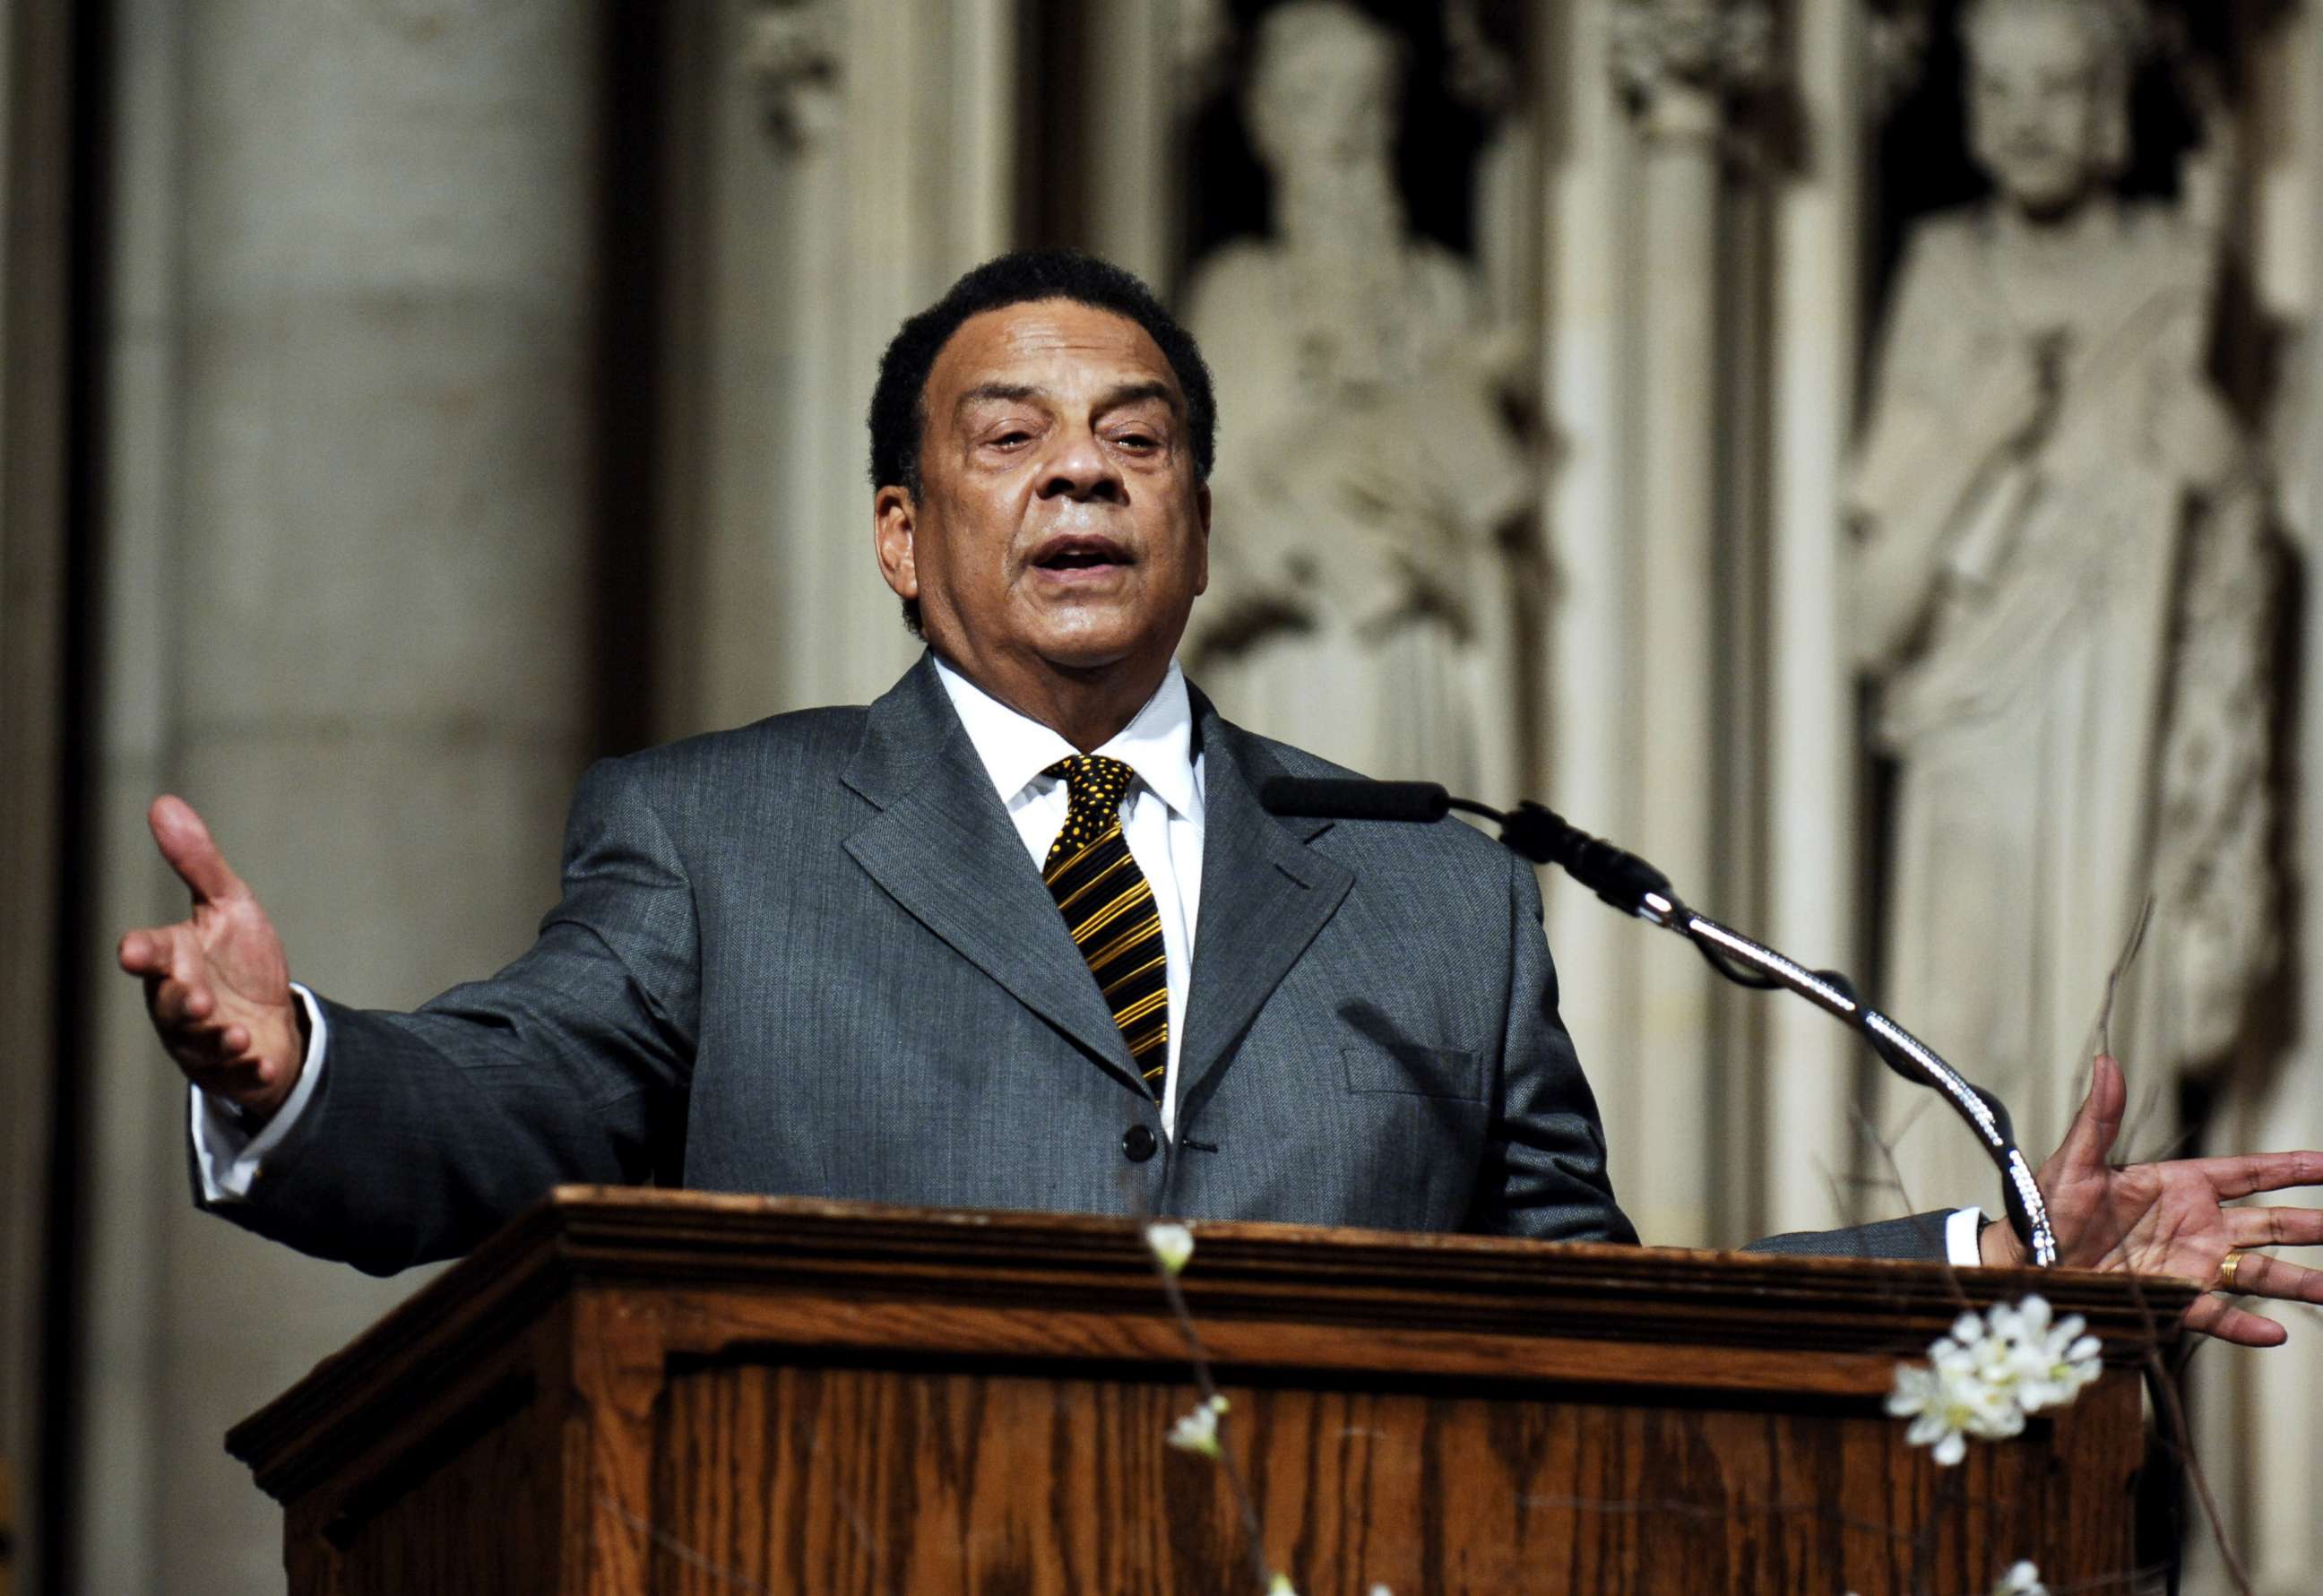 PHOTO: Andrew Young addresses the audience at The "Realizing the Dream" Martin Luther King Jr Tribute at Riverside Church in New York, Jan. 15, 2006. 